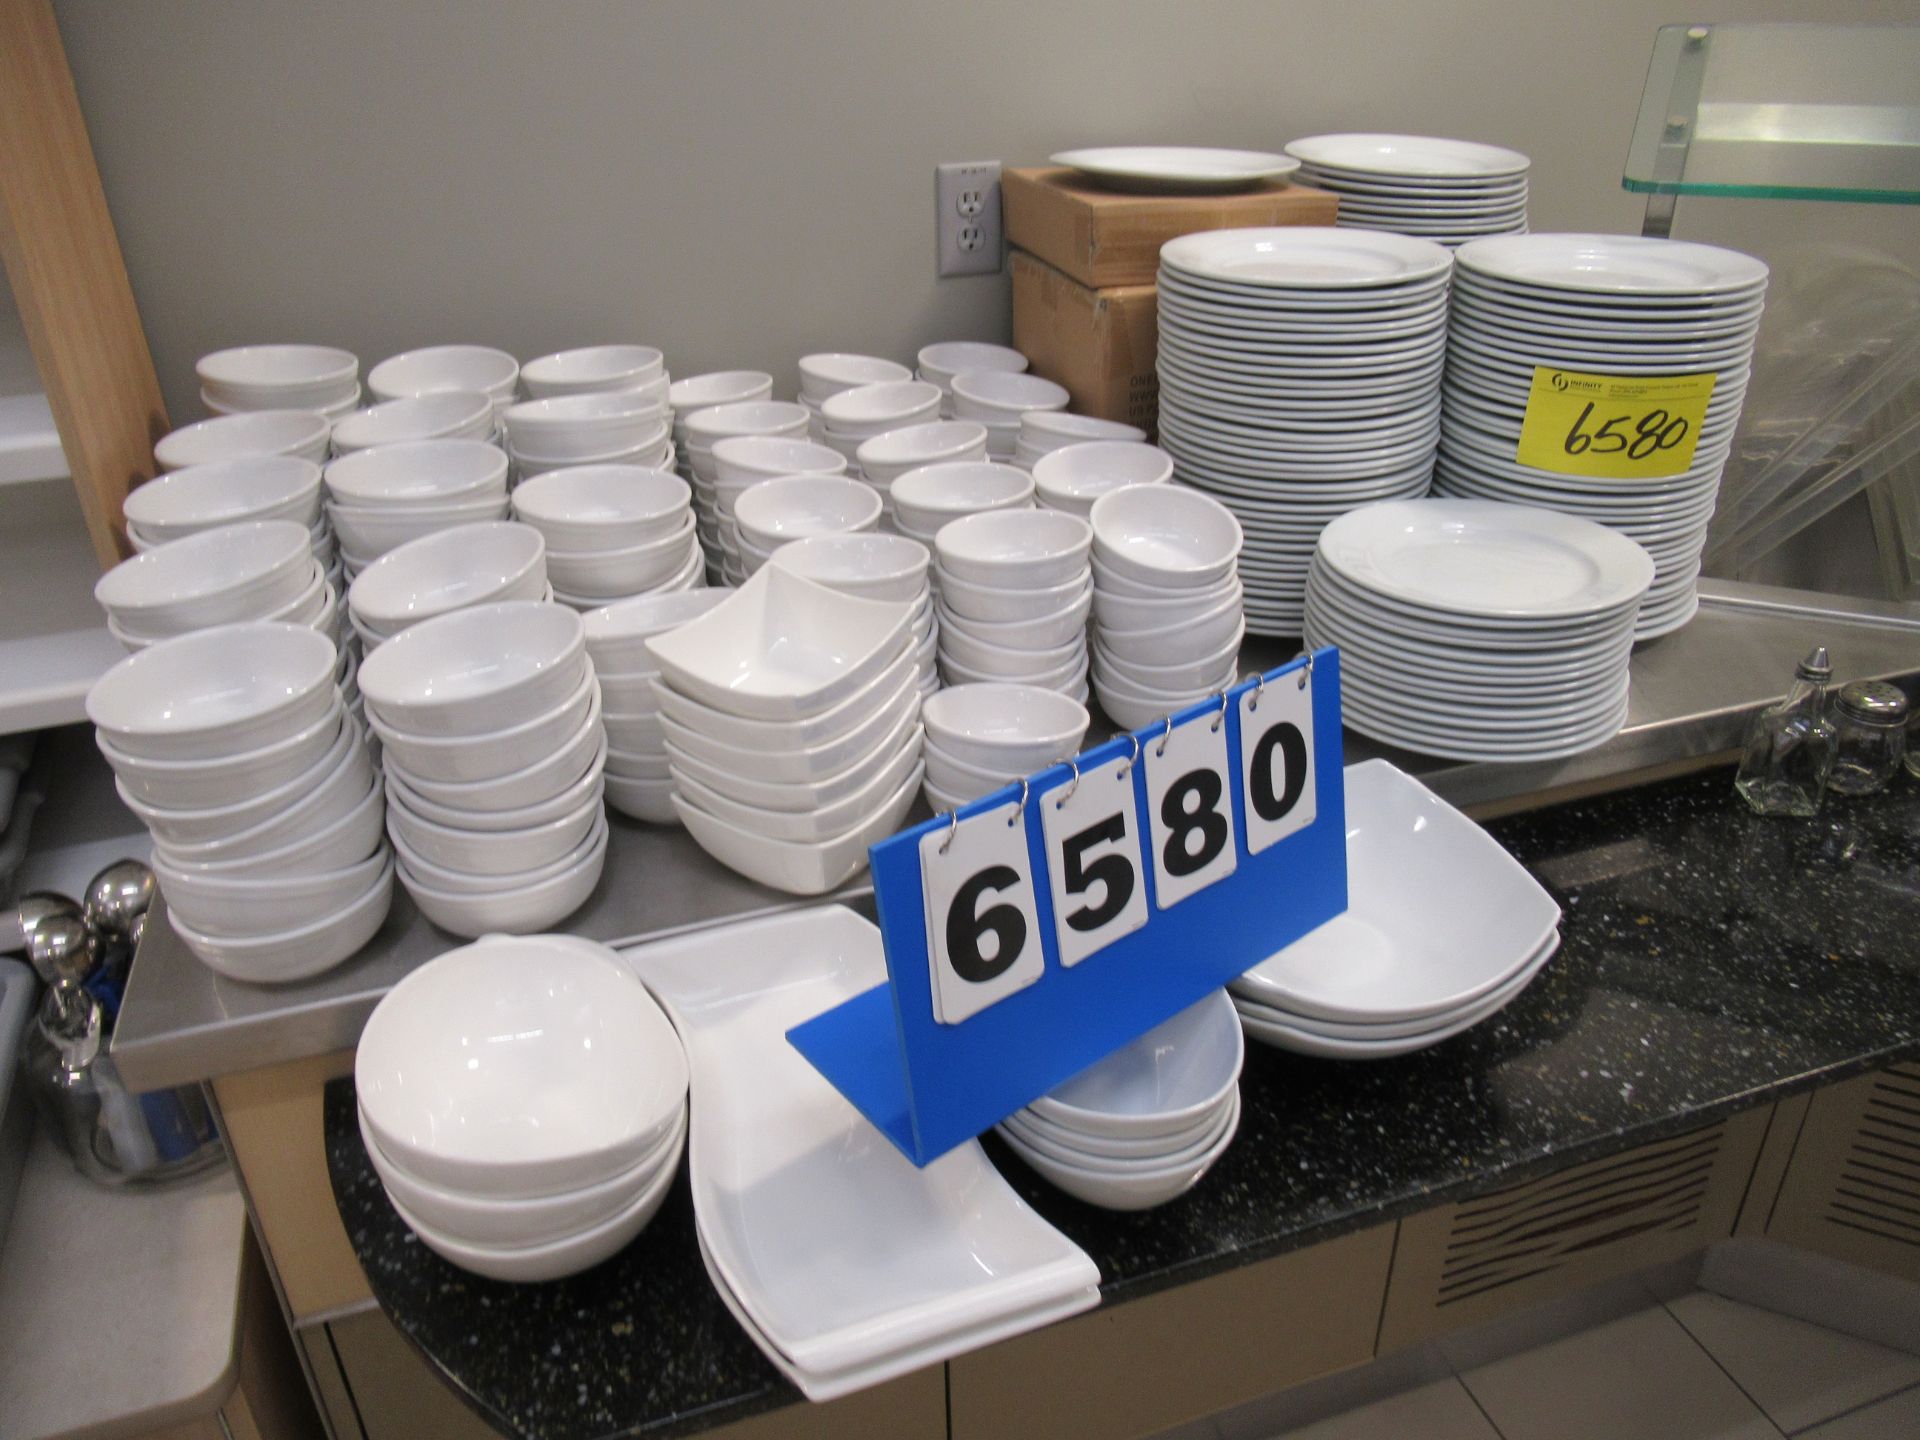 LOT OF ASSORTED WHITE CERAMIC PLATES AND BOWLS (REUTER) - Image 2 of 2